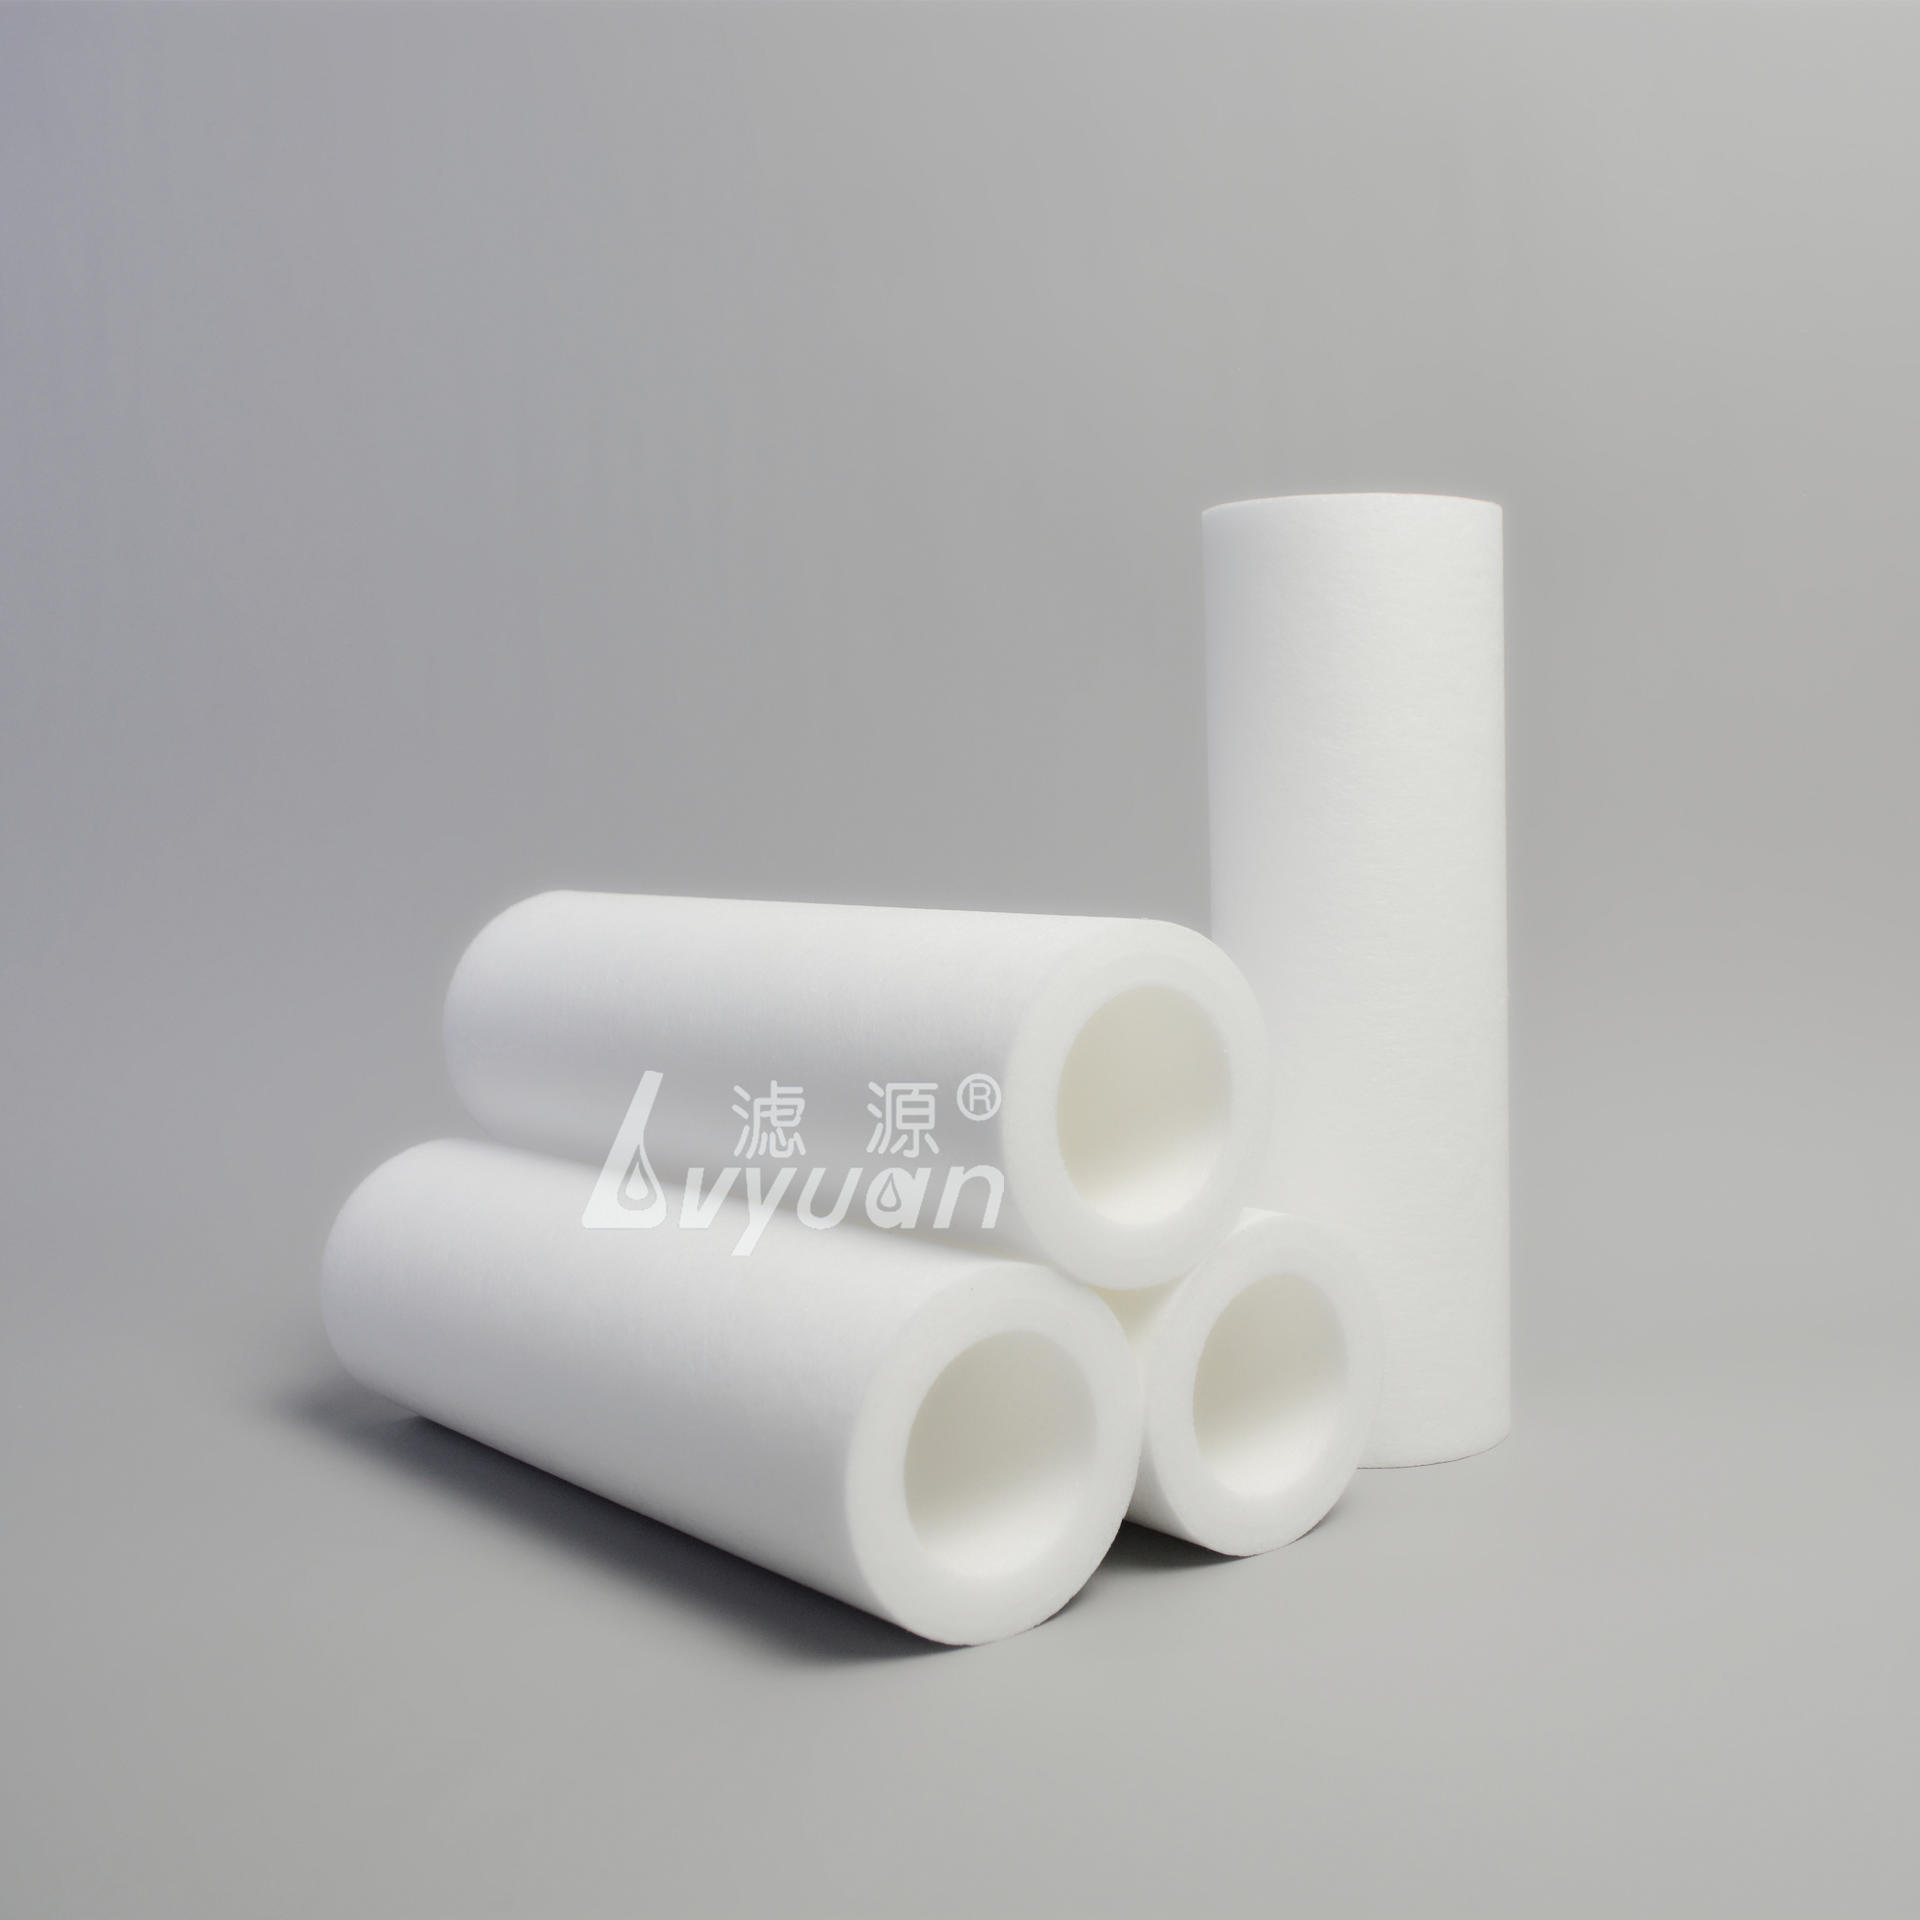 10 20 30 40 Inch PP Melt Blown Filter Cartridge/sediment filter 1micron 5 micron for Water Filter